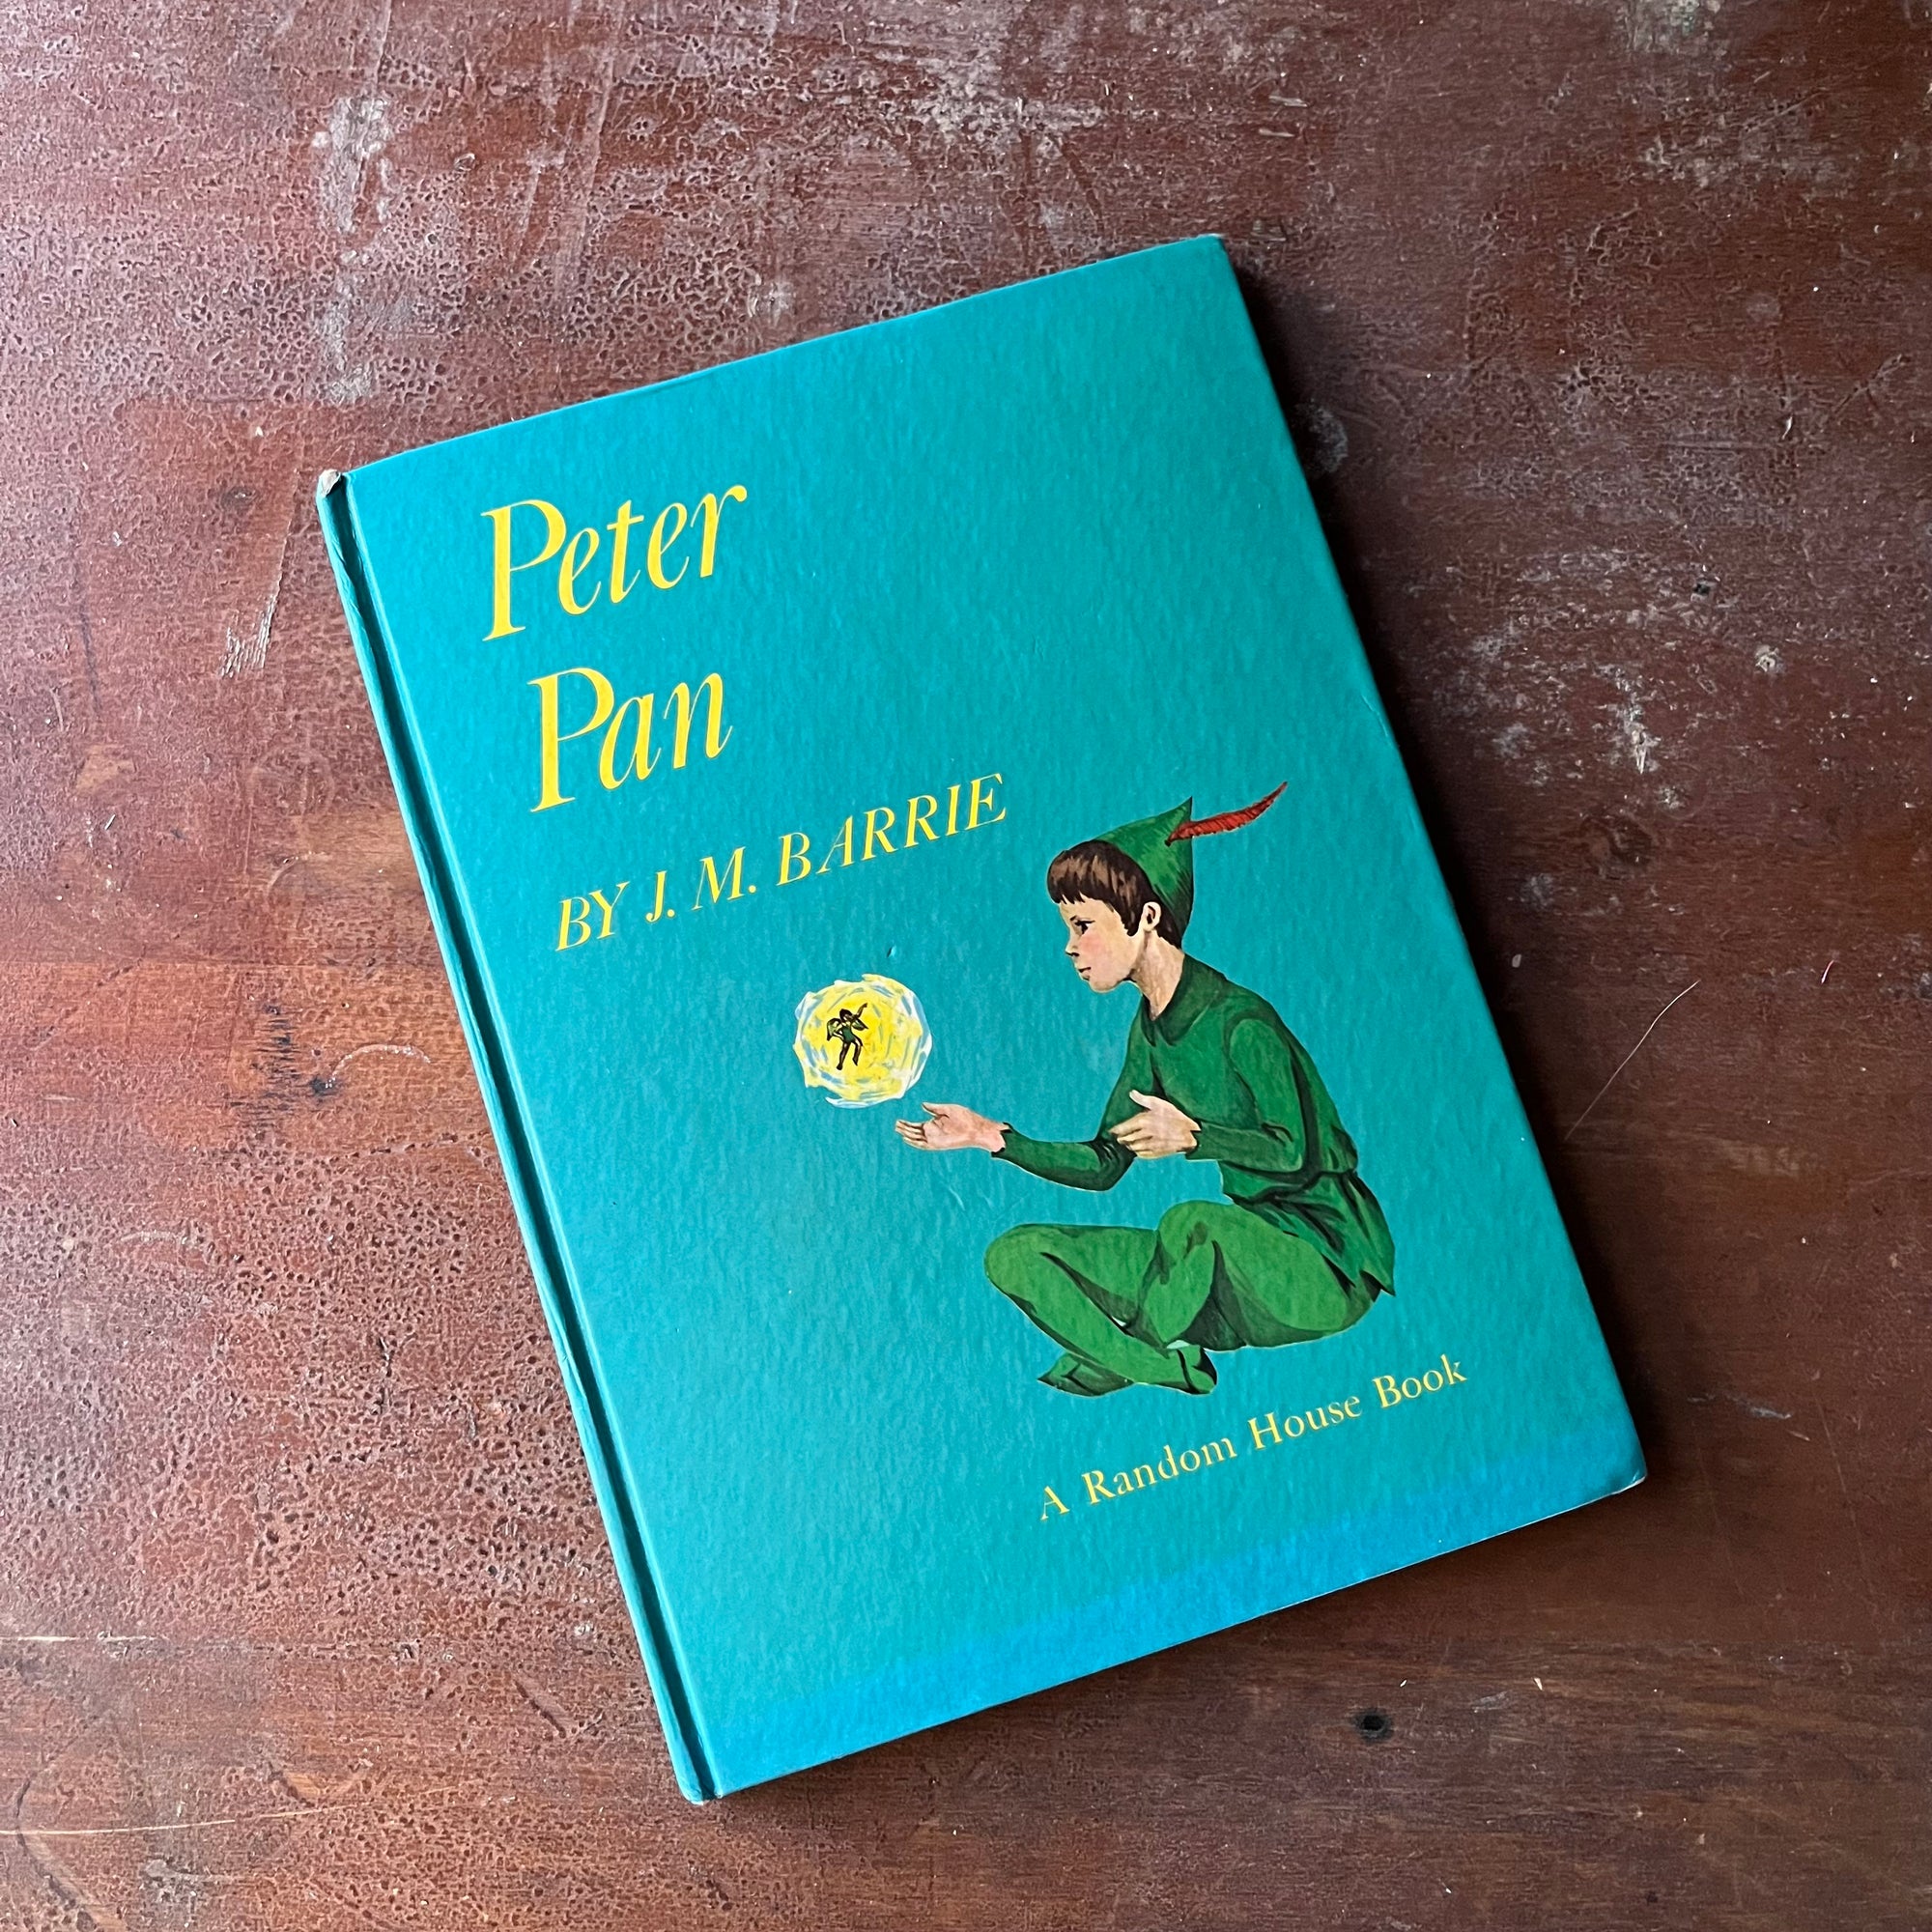 Peter Pan by J. M. Barrie with illustrations by Marjorie Torrey-A 1957 Random House Book-view of the front glossy cover with an illustration of peter pan & tinker bell with a turquoise blue background